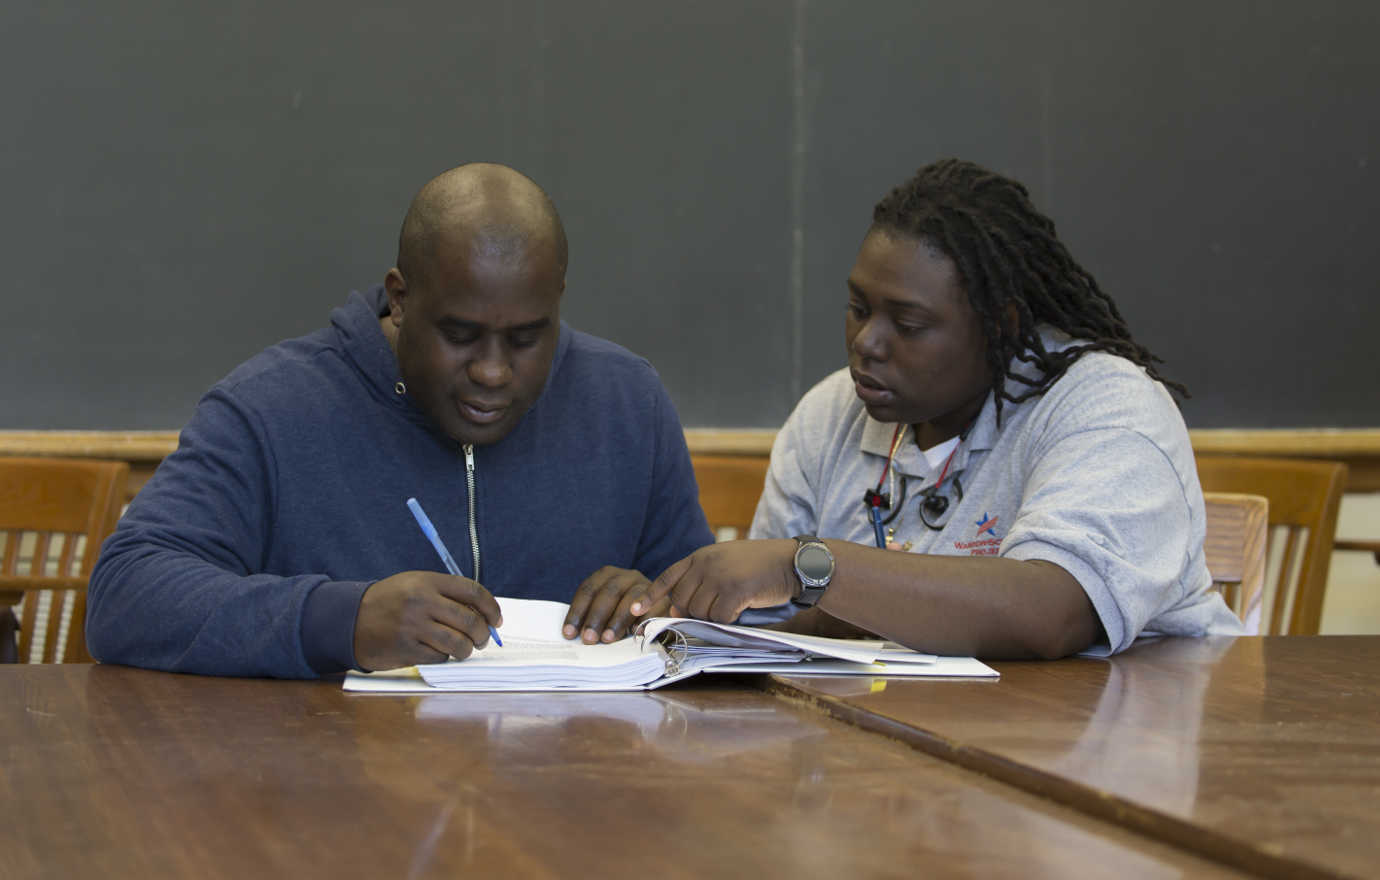 In the afternoons, Warrior-Scholar Project participants take part in writing workshops led by university faculty and staff. Image courtesy of the Warrior-Scholar Project.